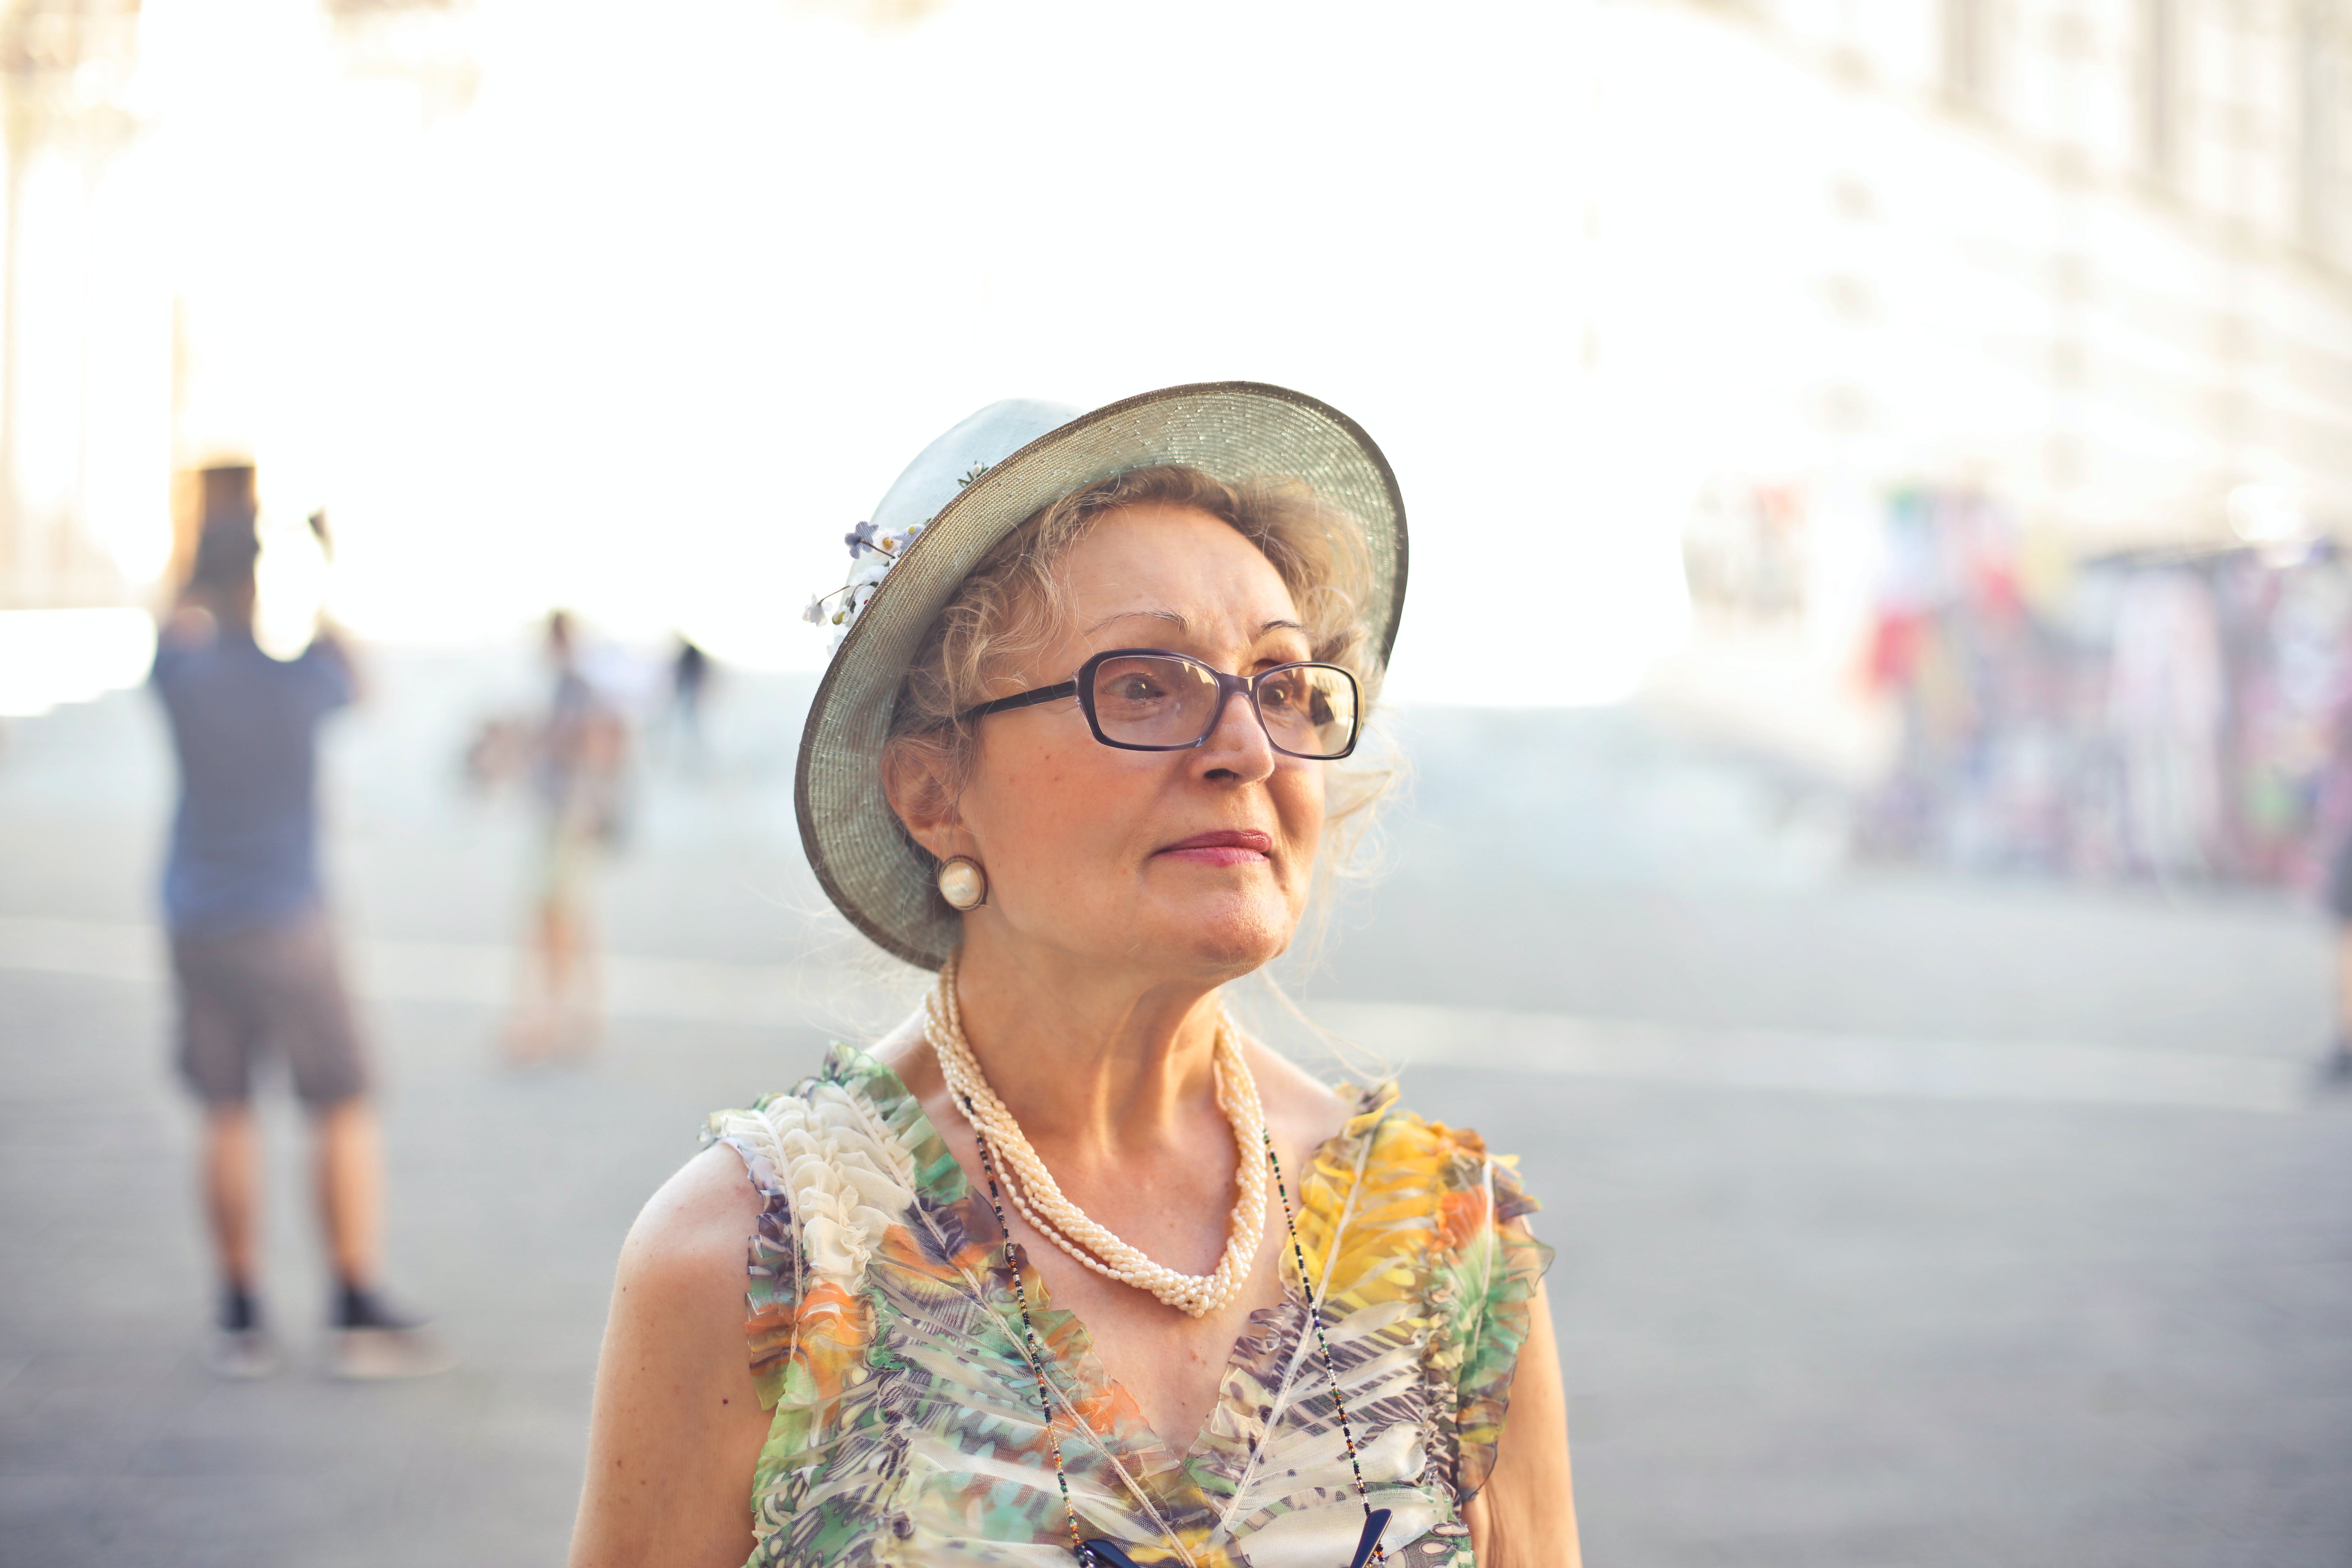 An older woman standing outside | Source: Pexels